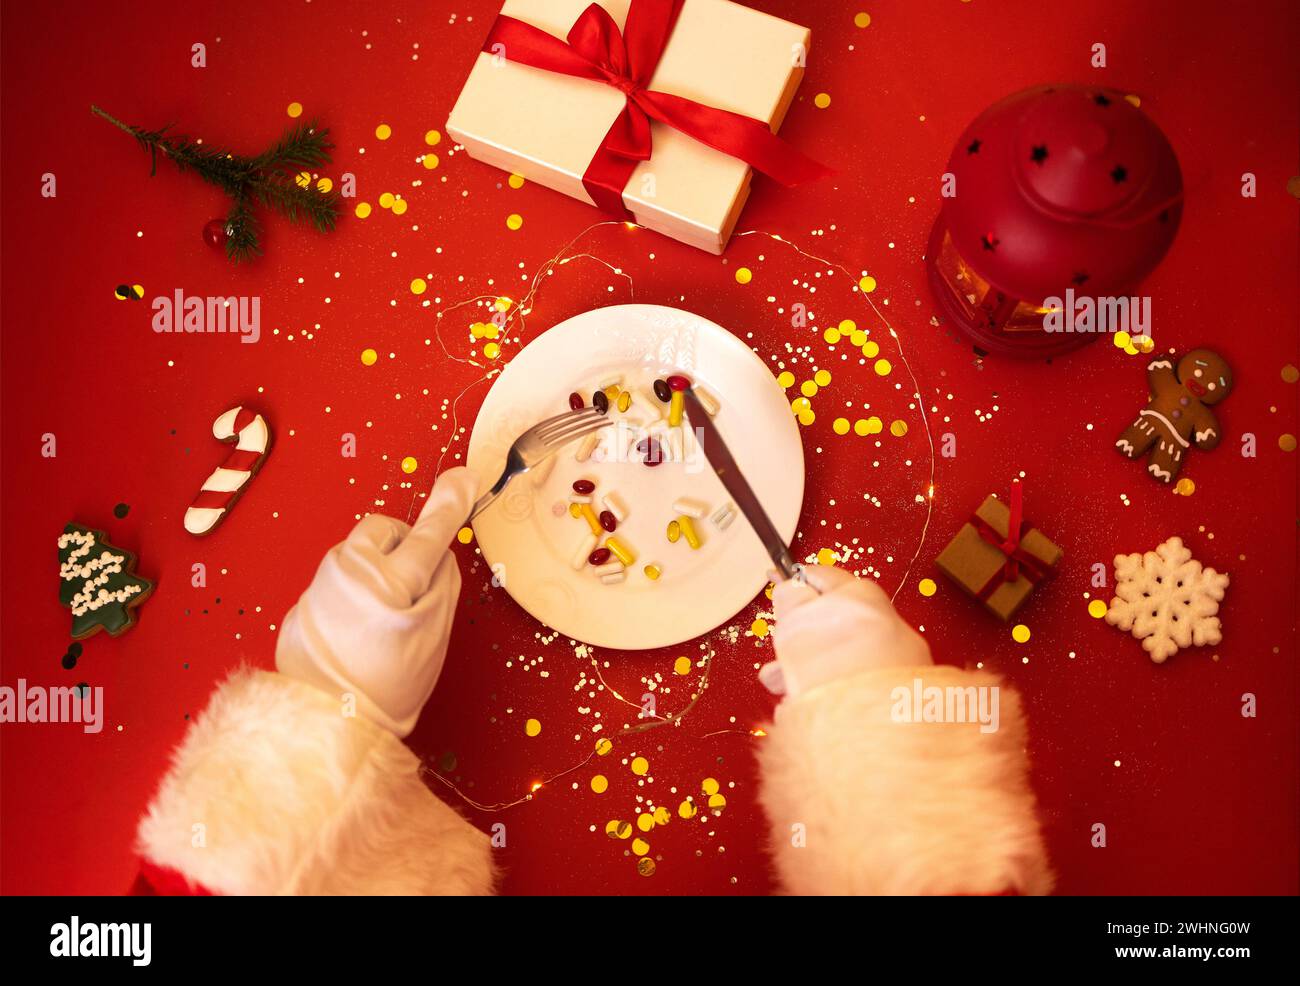 Santa Claus with plate with tablets, pills and capsules. Hands in white gloves hold knife and fork. Stock Photo